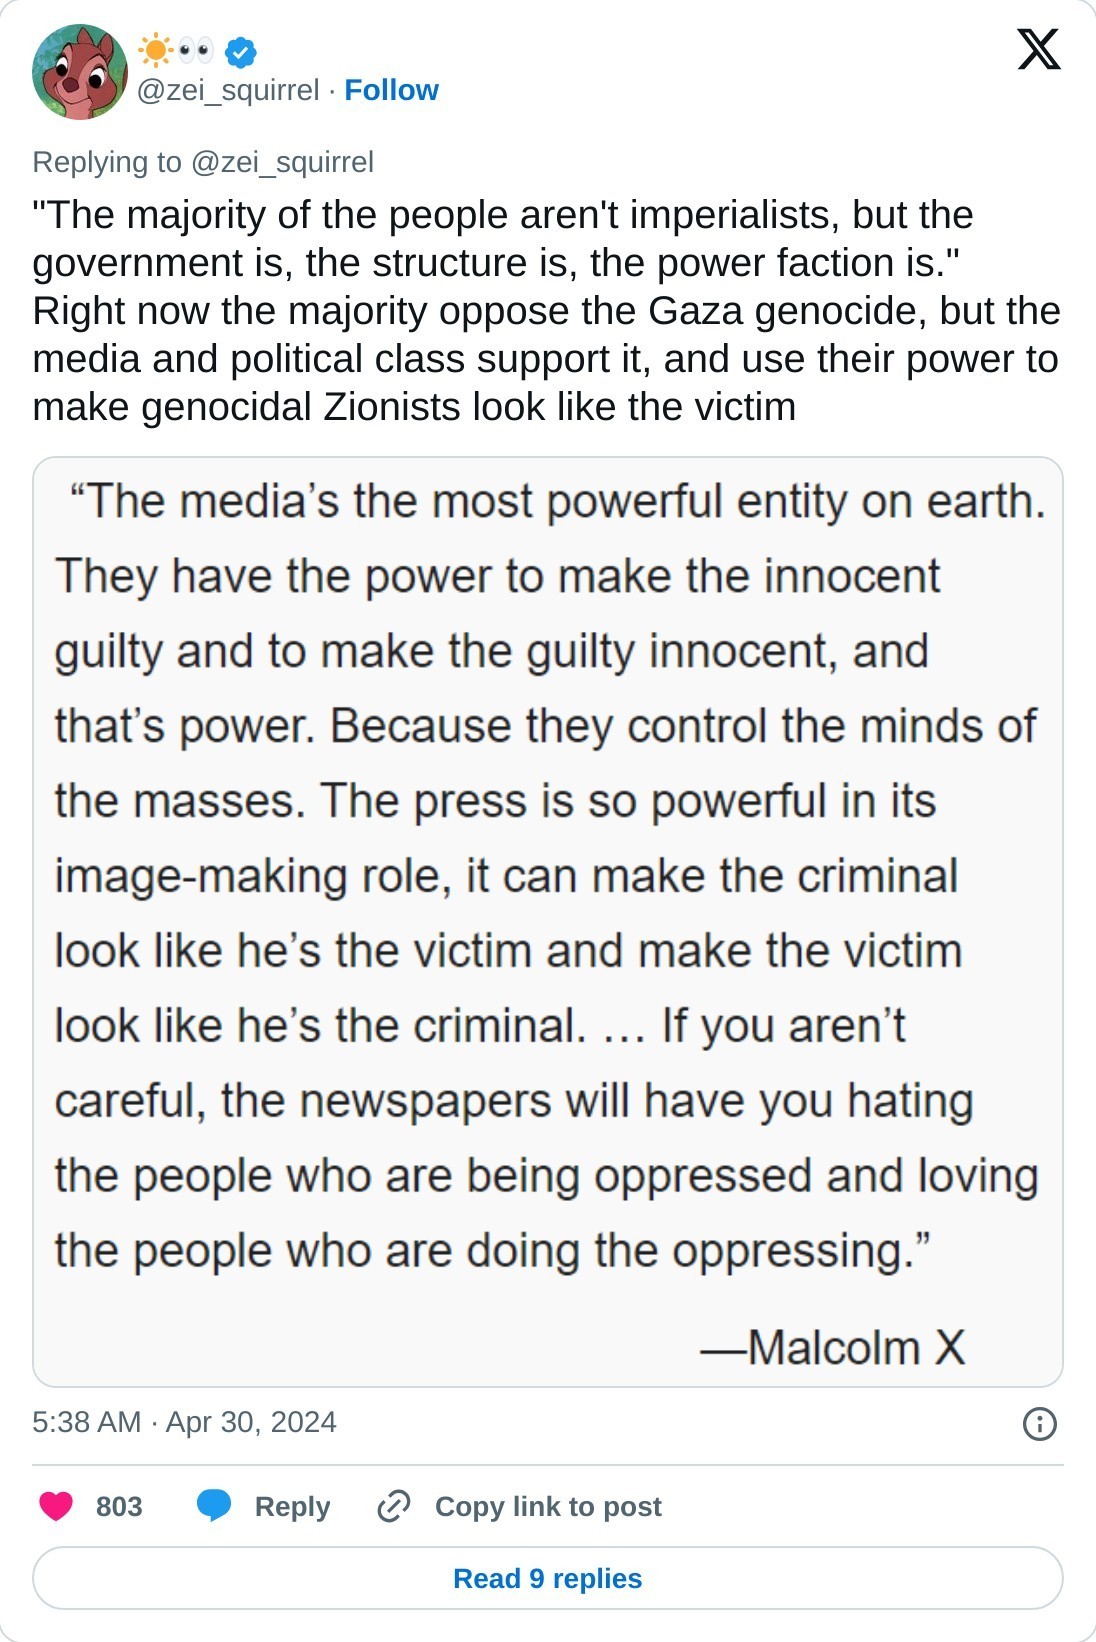 "The majority of the people aren't imperialists, but the government is, the structure is, the power faction is." Right now the majority oppose the Gaza genocide, but the media and political class support it, and use their power to make genocidal Zionists look like the victim pic.twitter.com/4AaJfGUlpt  — ☀️👀 (@zei_squirrel) April 30, 2024